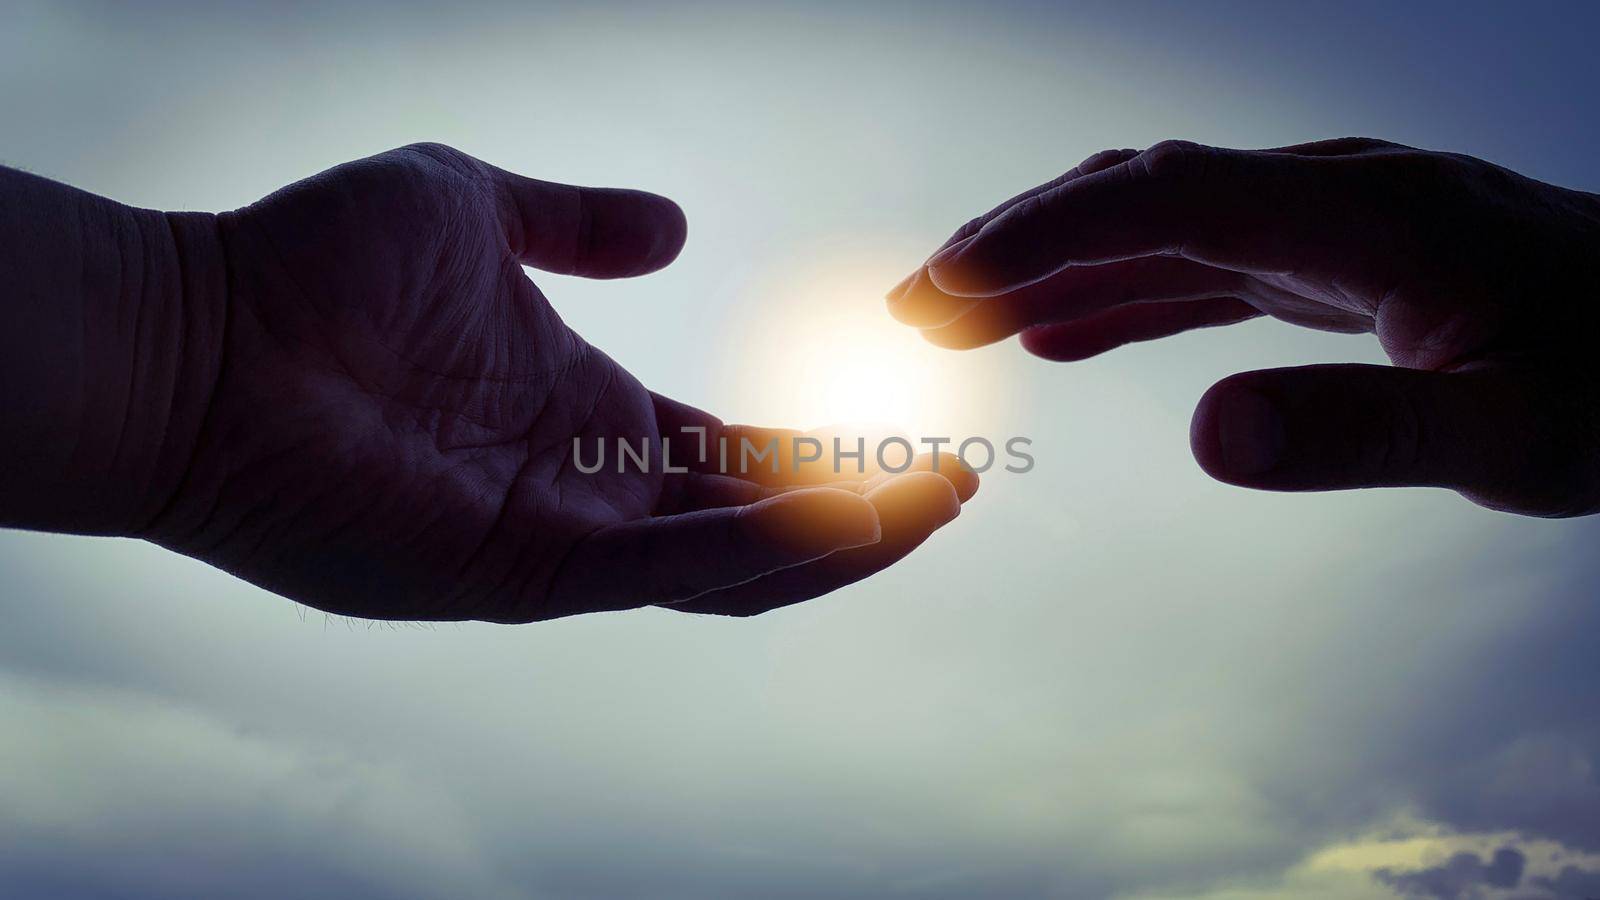 Two hands reaching out to bright shining light. Religious concept